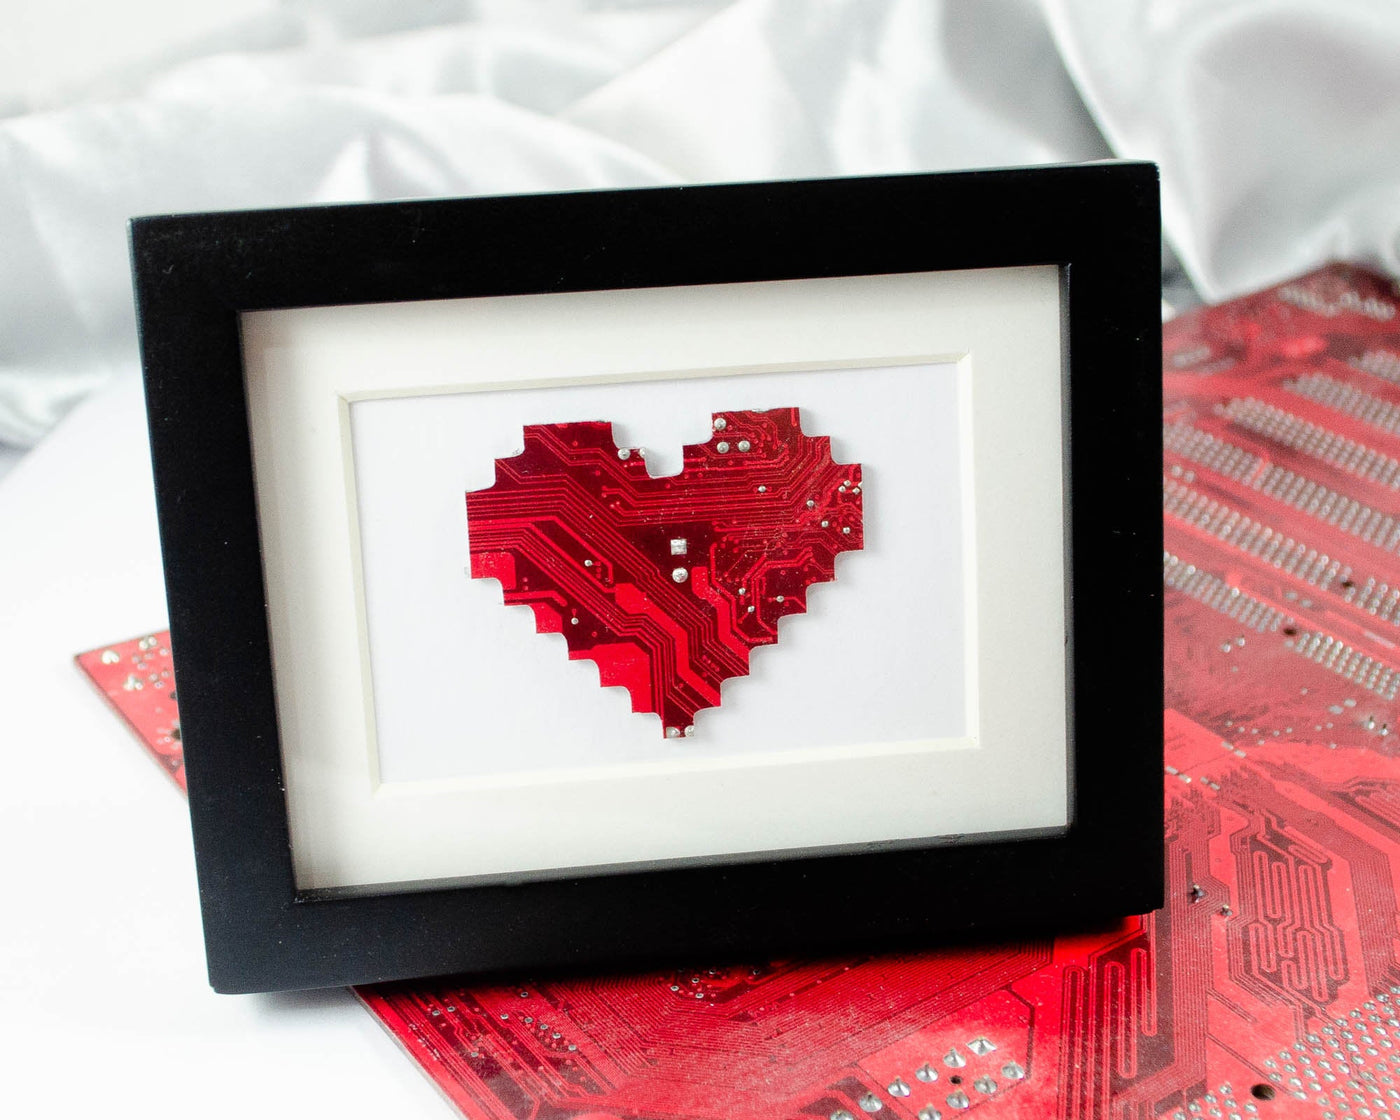 handmade art piece of a pixelated heart made from recycled circuit board